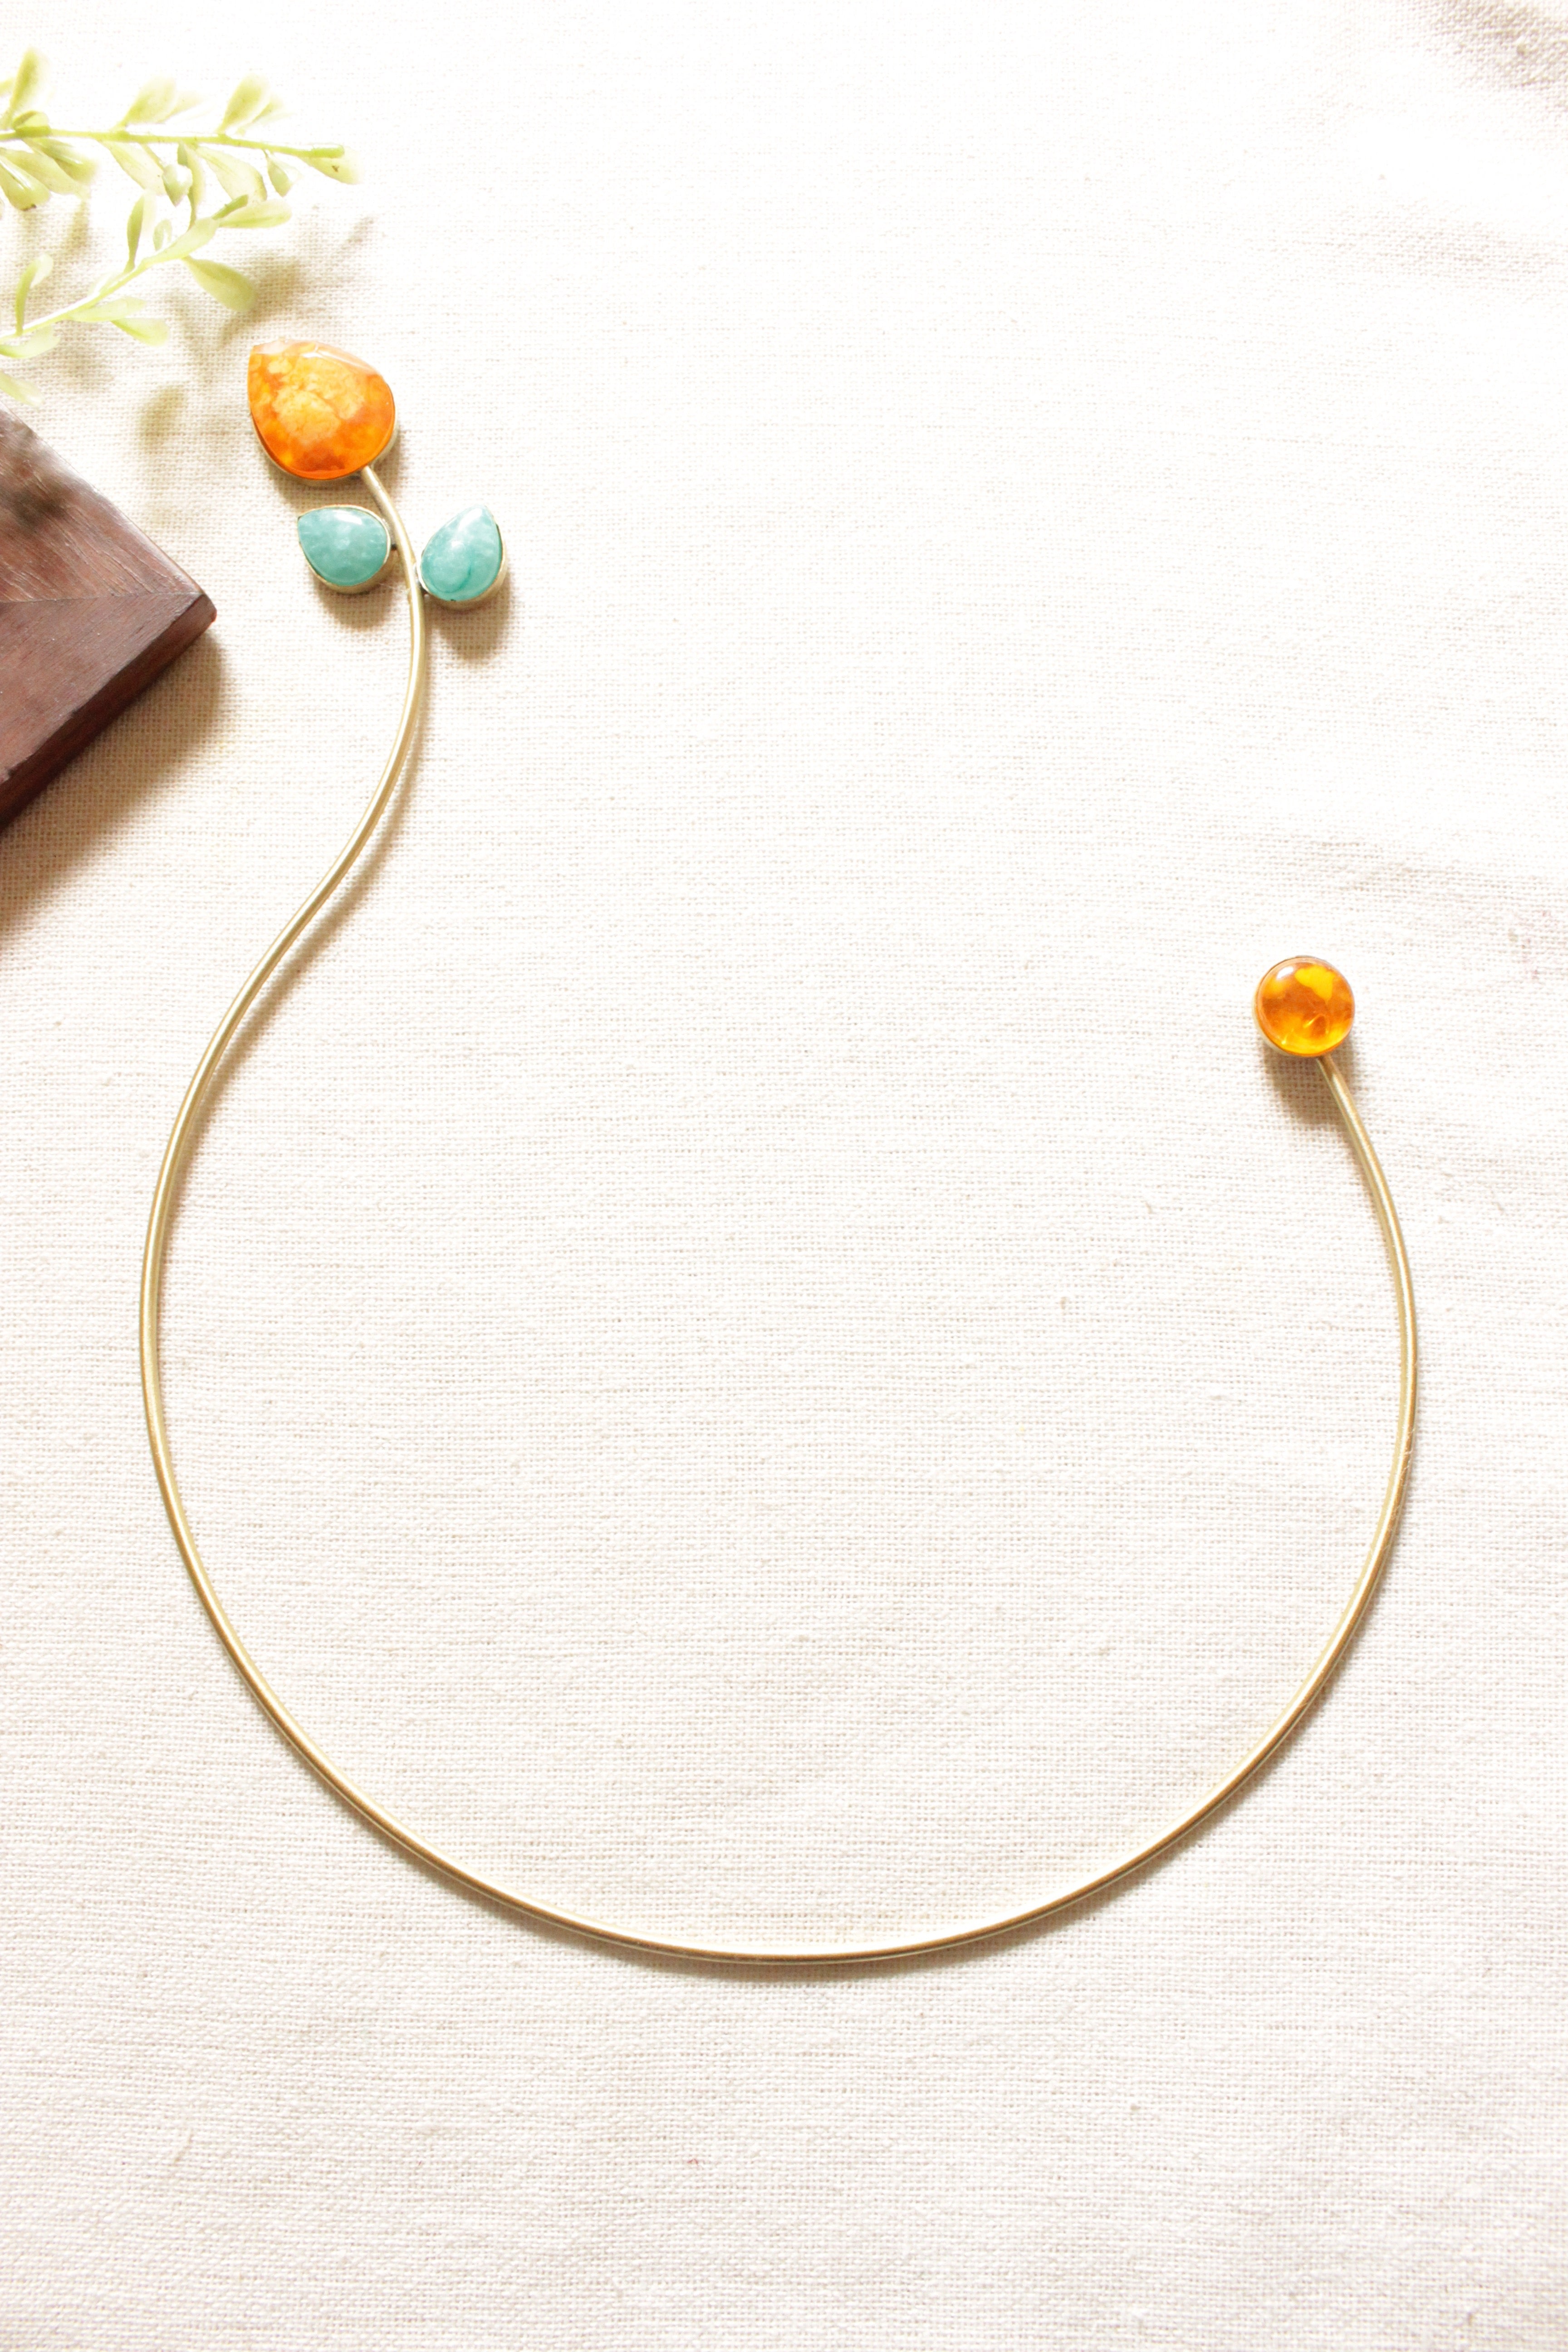 Gold Toned Brass Choker Necklace Embedded with Orange and Blue Gemstones